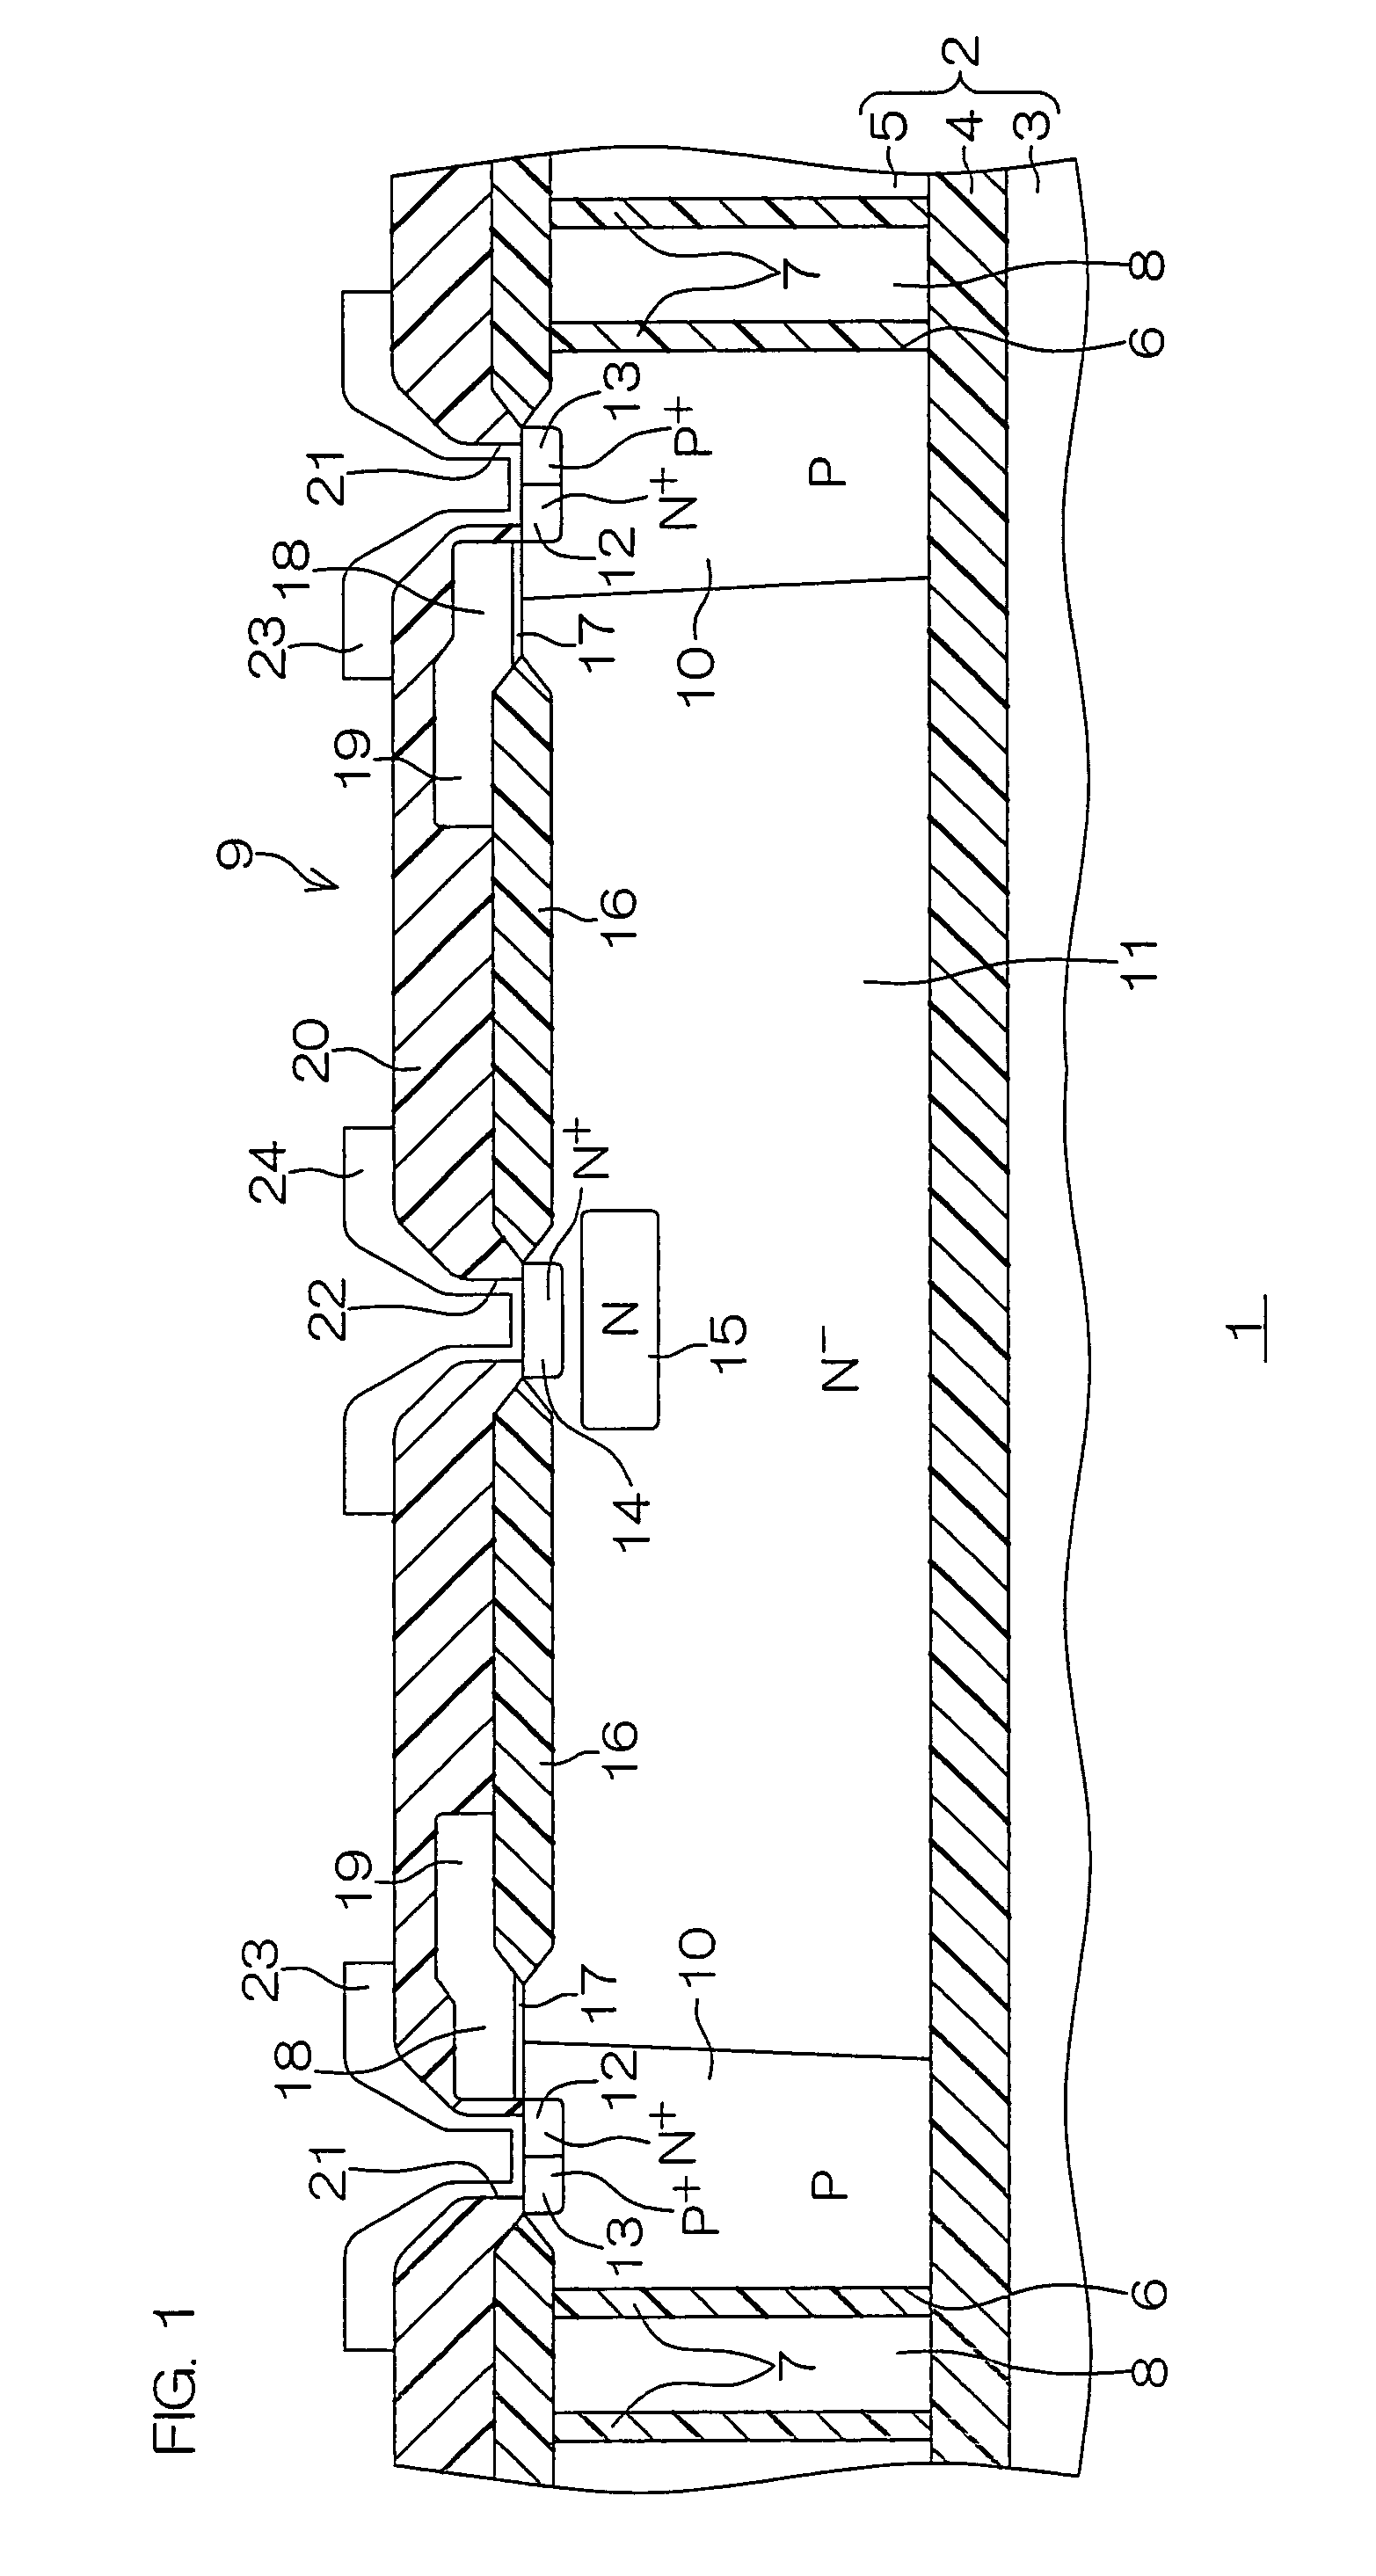 Lateral double diffused MOSFET device